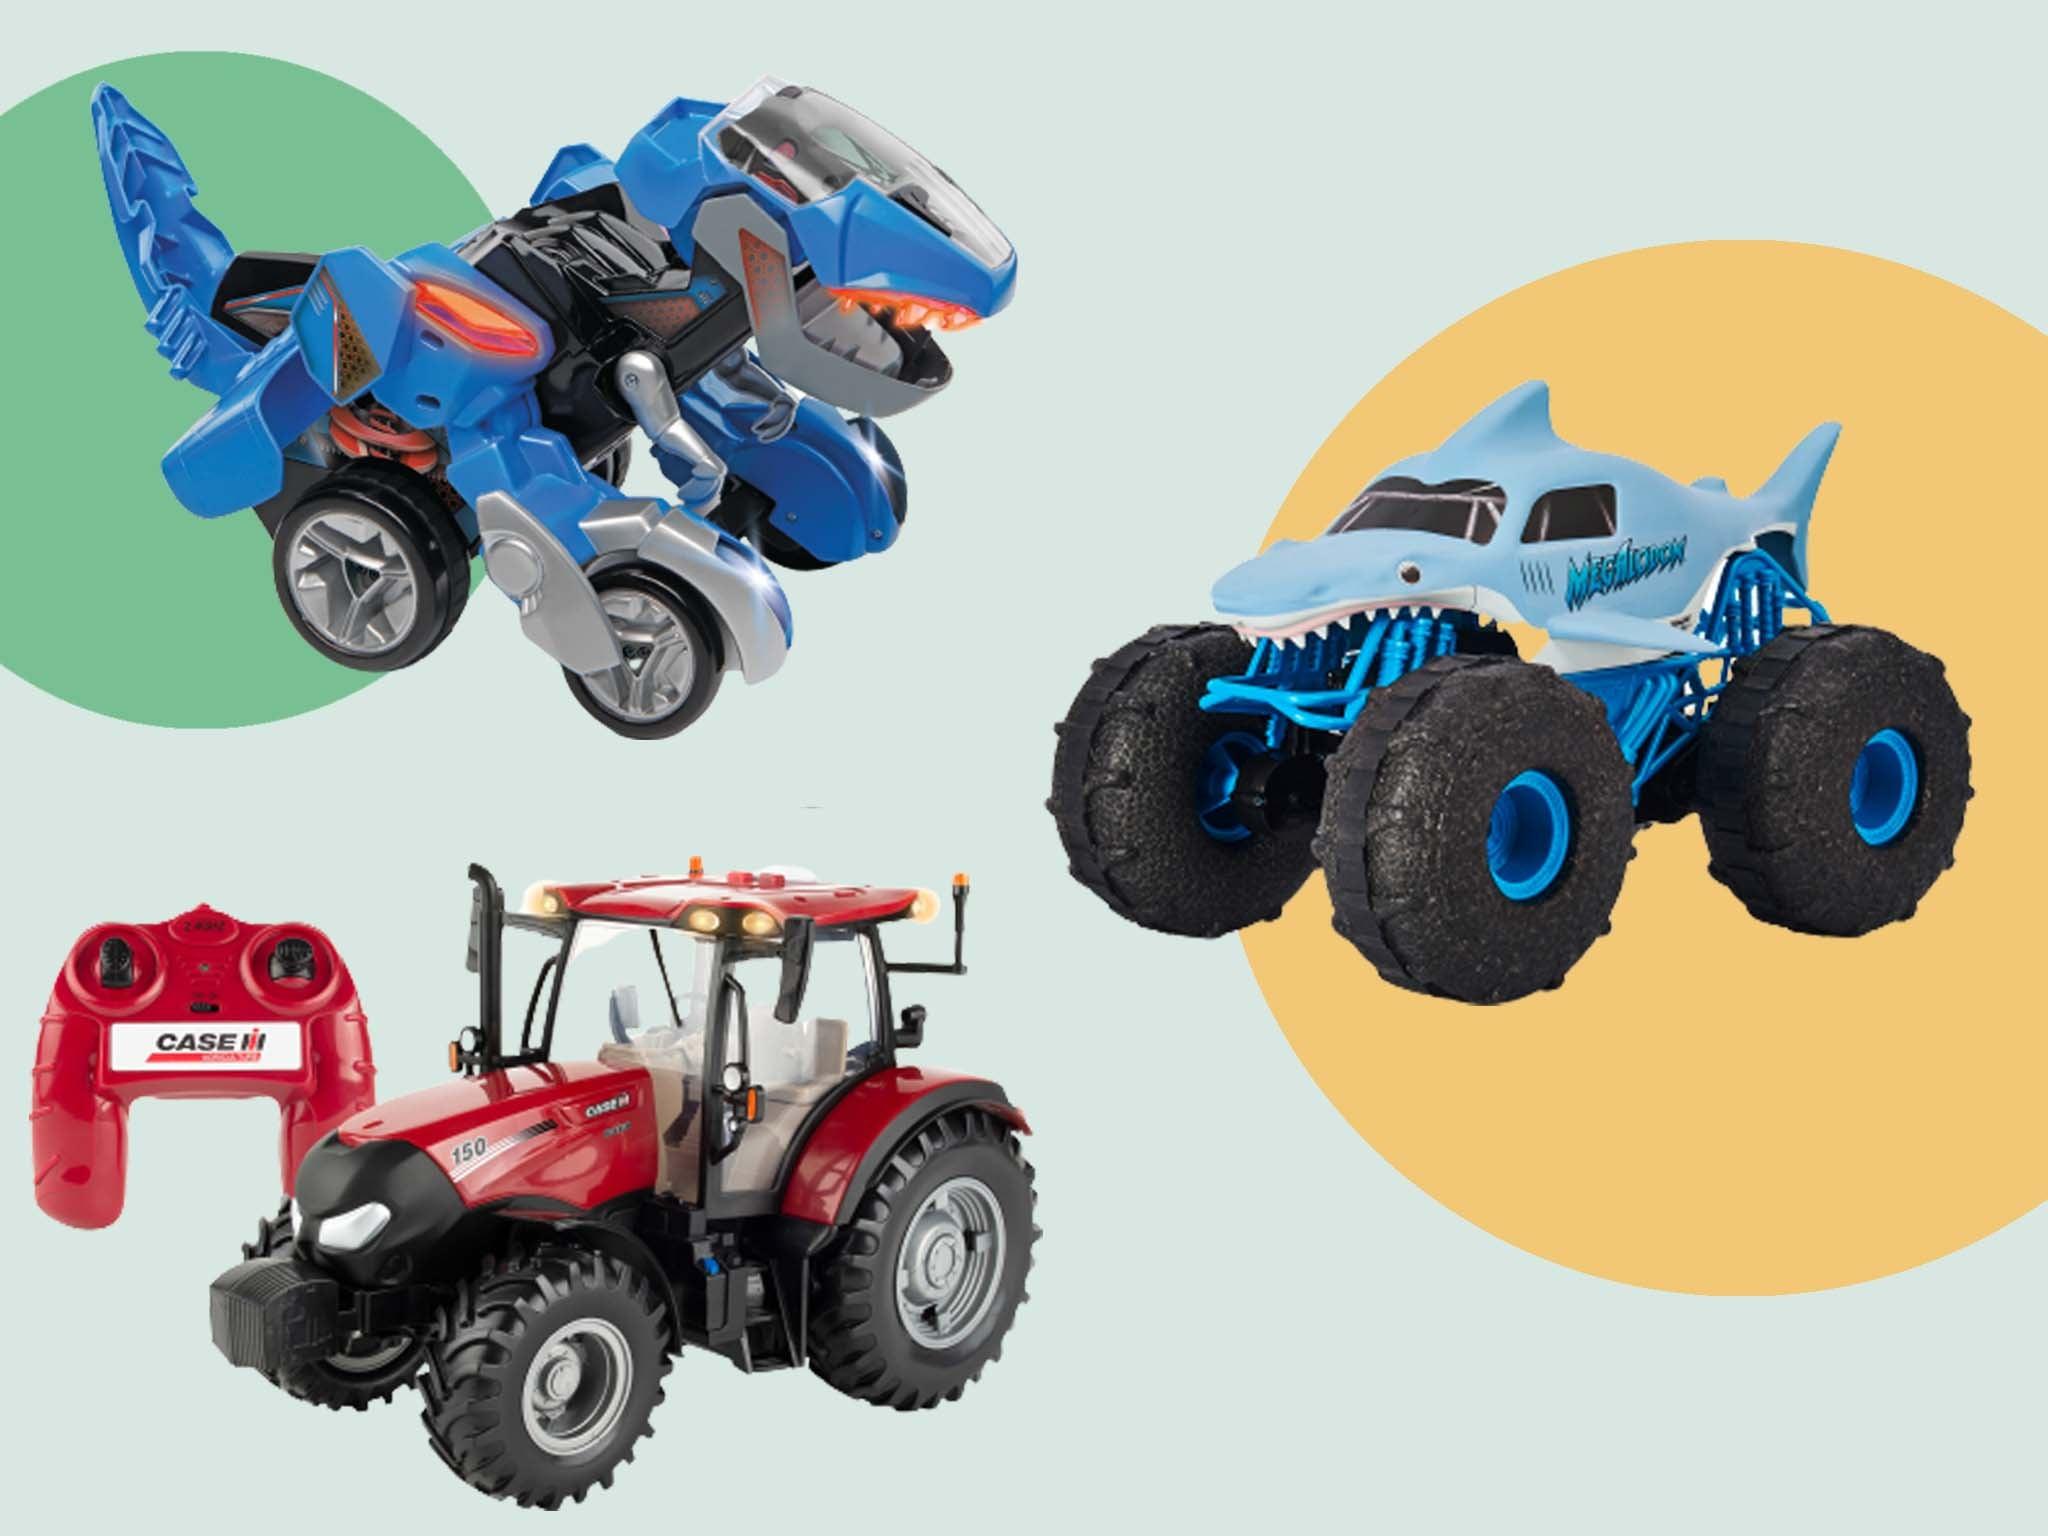 Durable Remote Control Car: The Benefits of Owning a Durable Remote Control Car